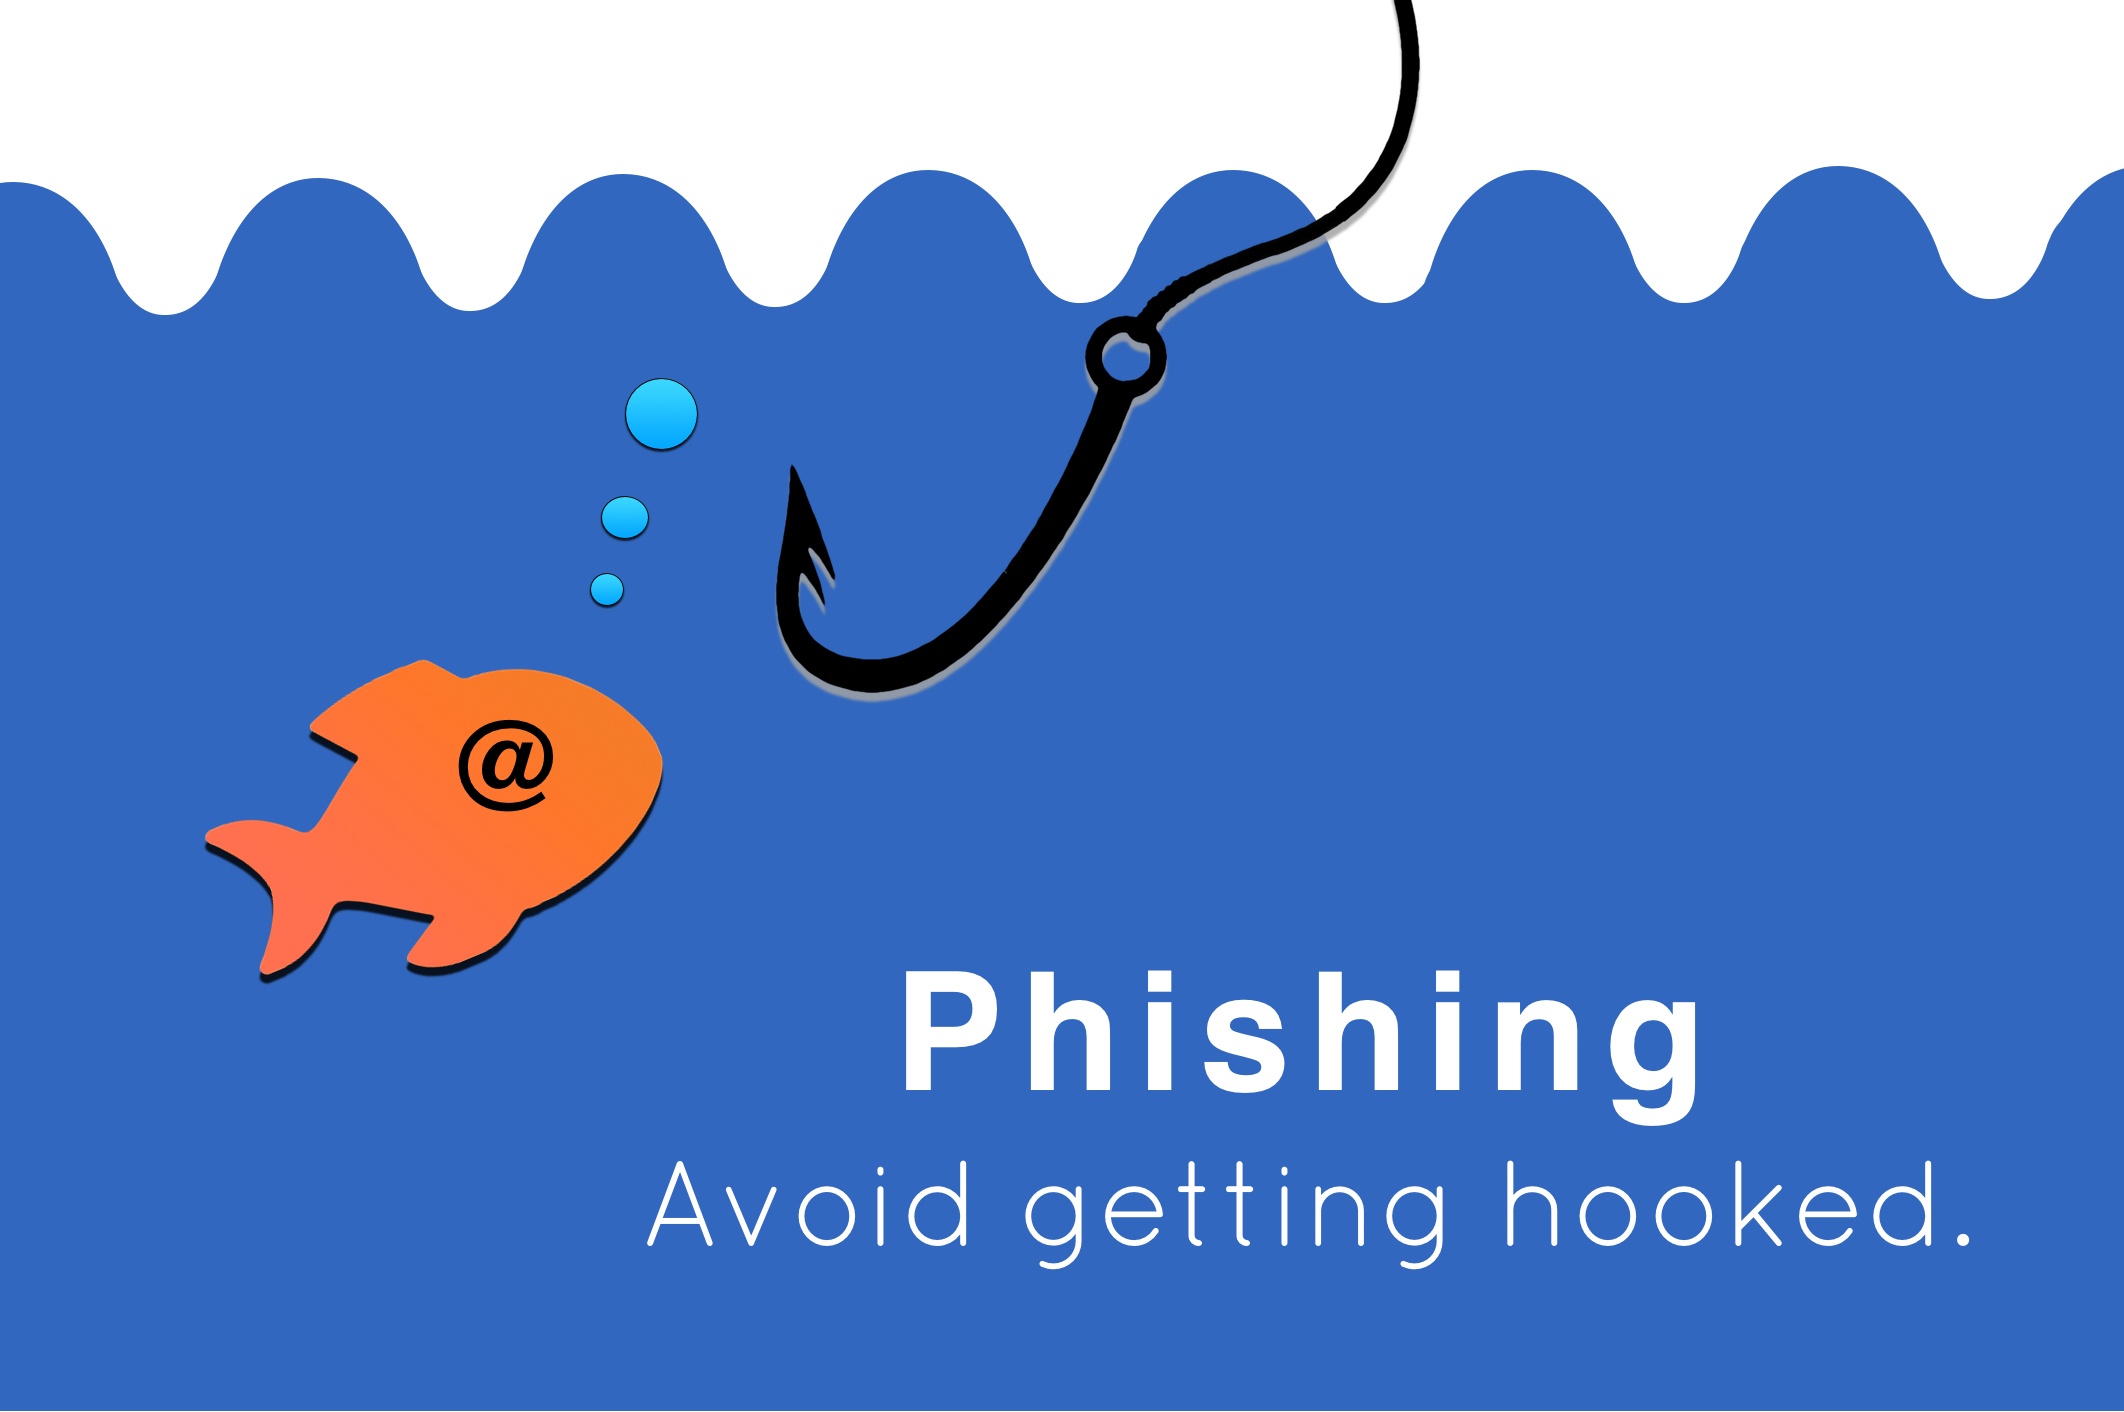 What is the Best Phishing Defense? A Good Offense.